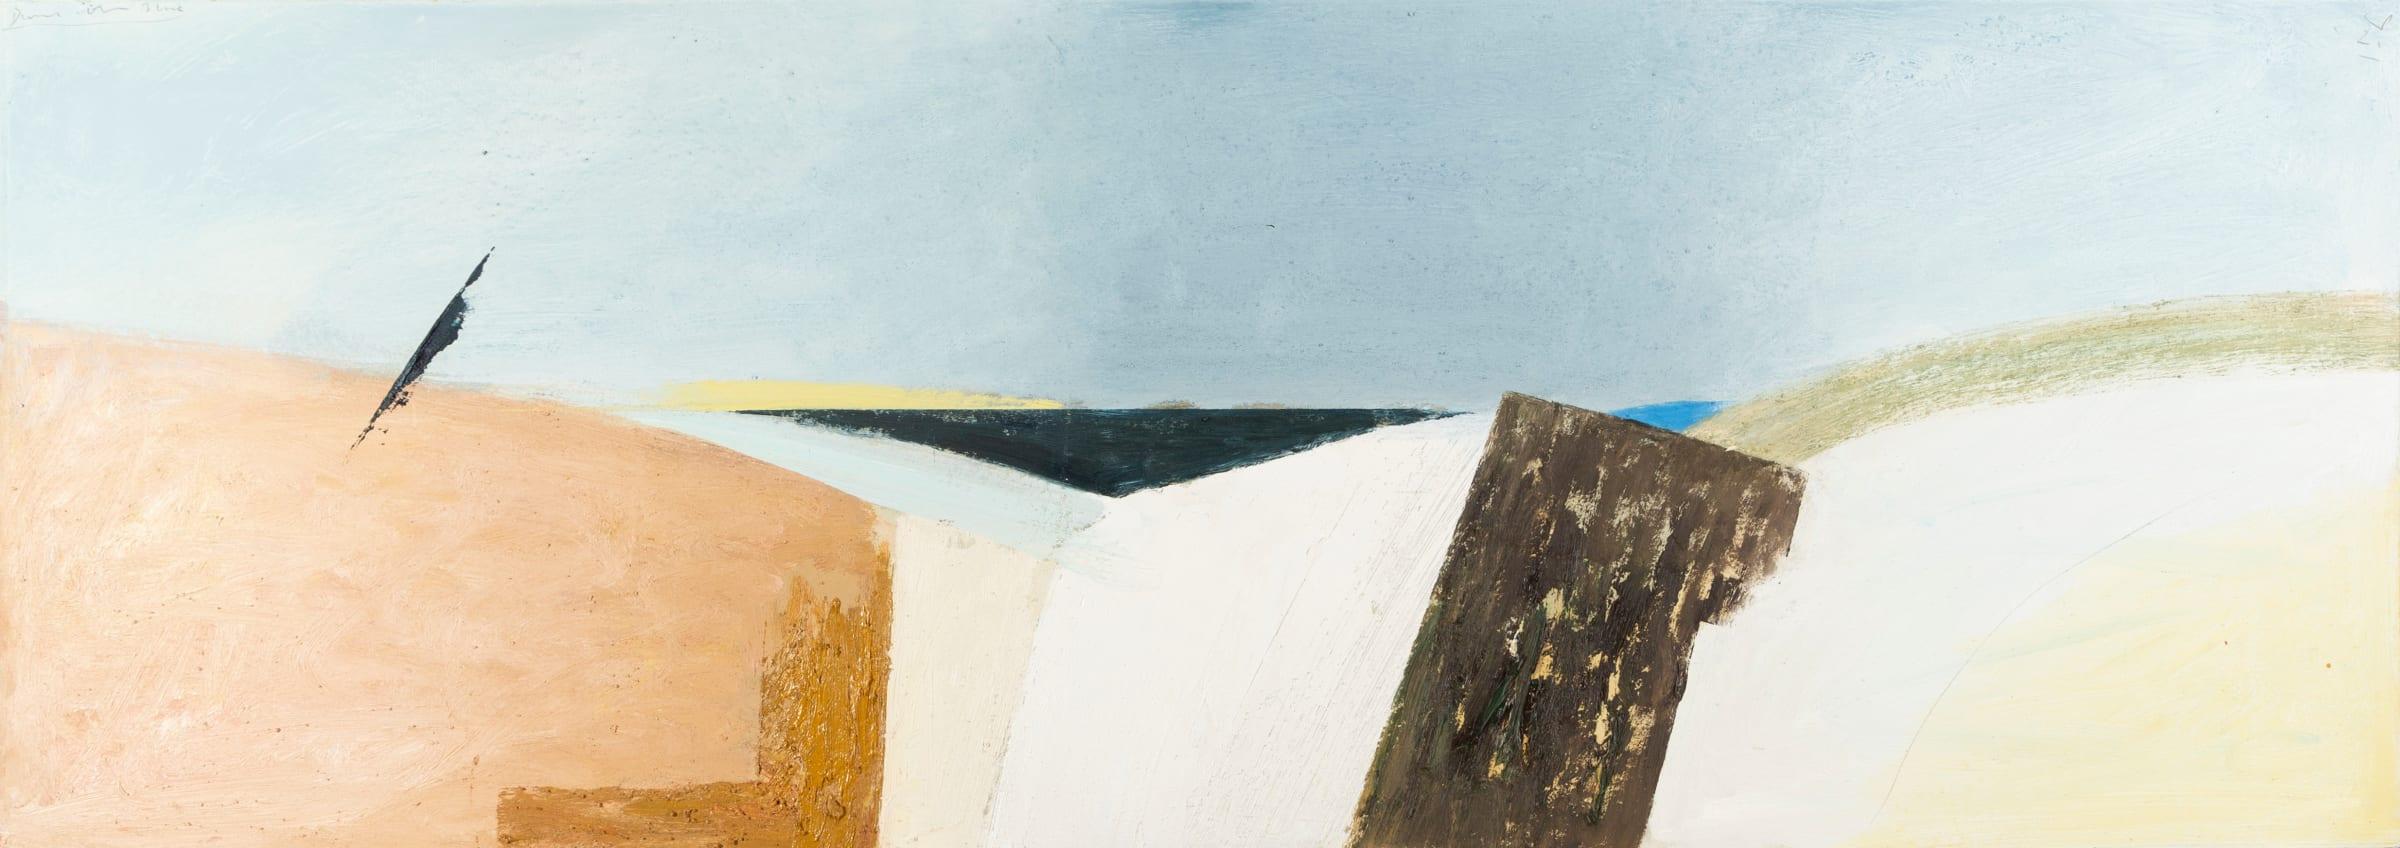 Dune with Blue, Oil on Panel Painting by Keith Purser B. 1944, 2021

Additional information:
Medium: Oil, chalk pastel and sand on panel
Dimensions: 43 x 121.5 cm
16 7/8 x 47 7/8 in
Signed, titled and dated

Keith Purser lives and works on the edge